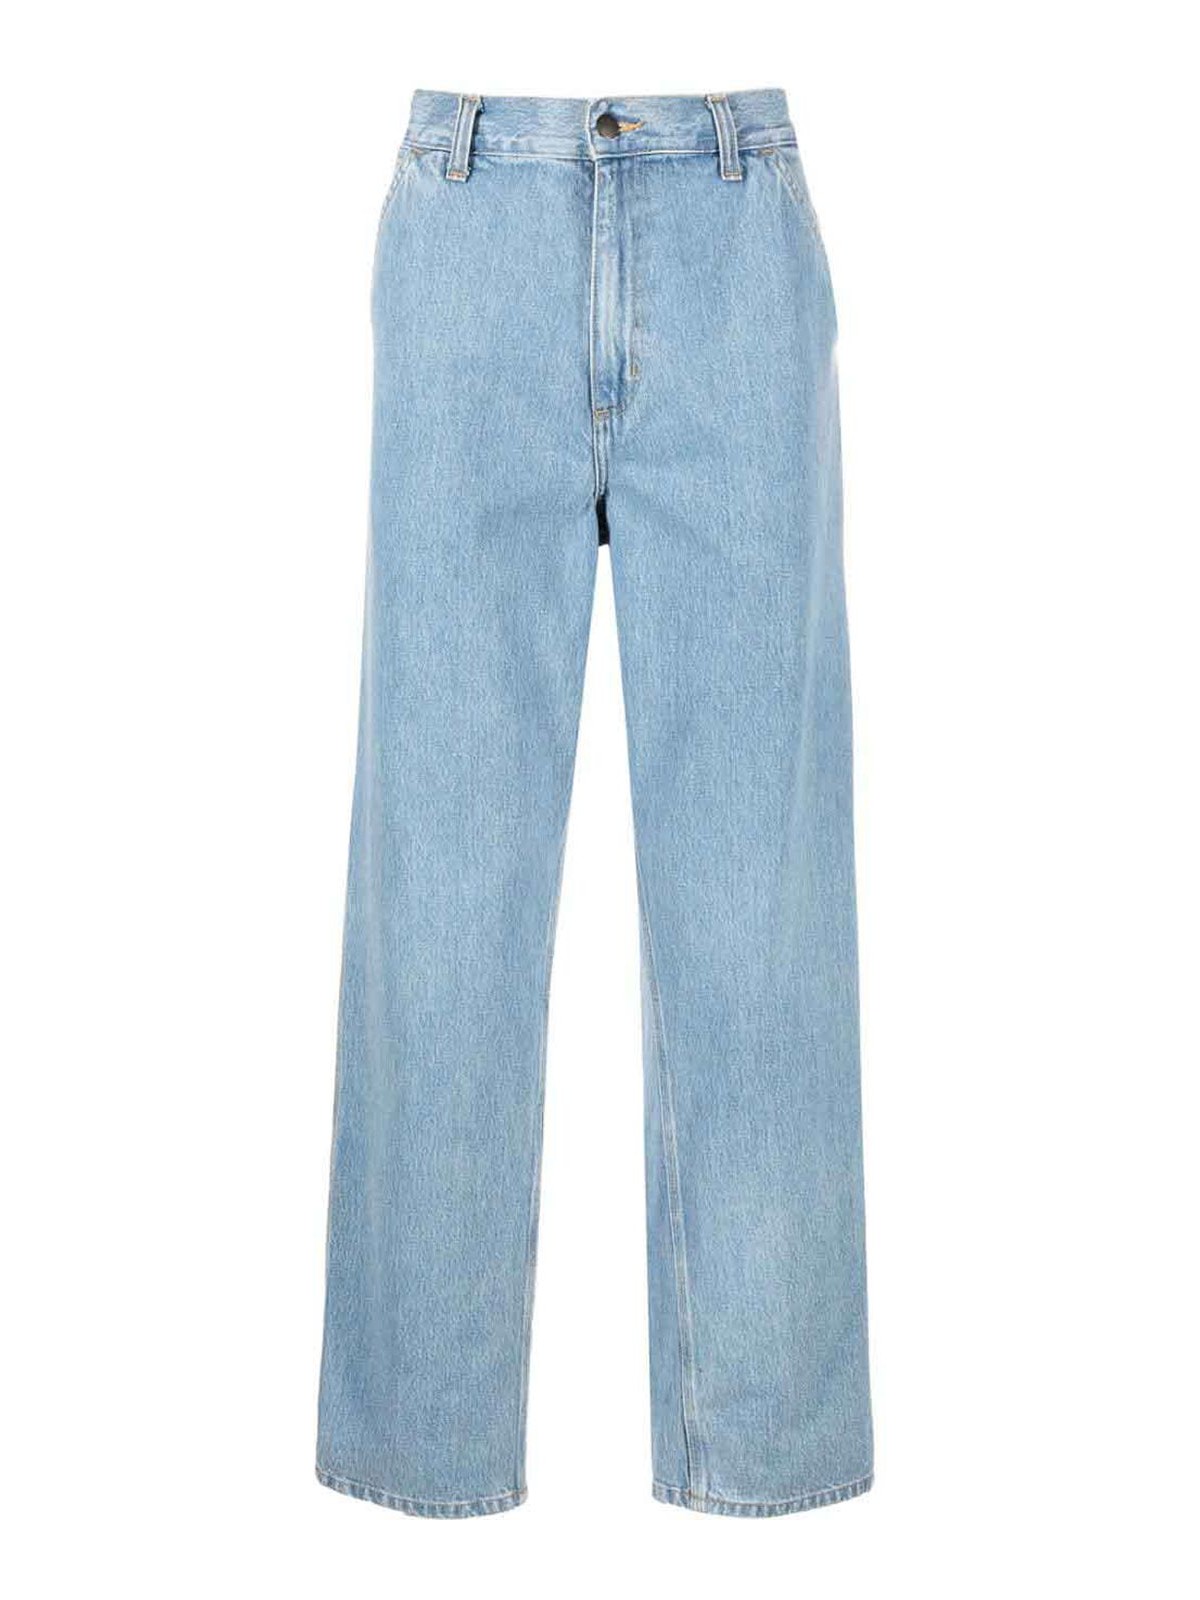 Shop Carhartt Relaxed Fit Denim Jeans In Blue